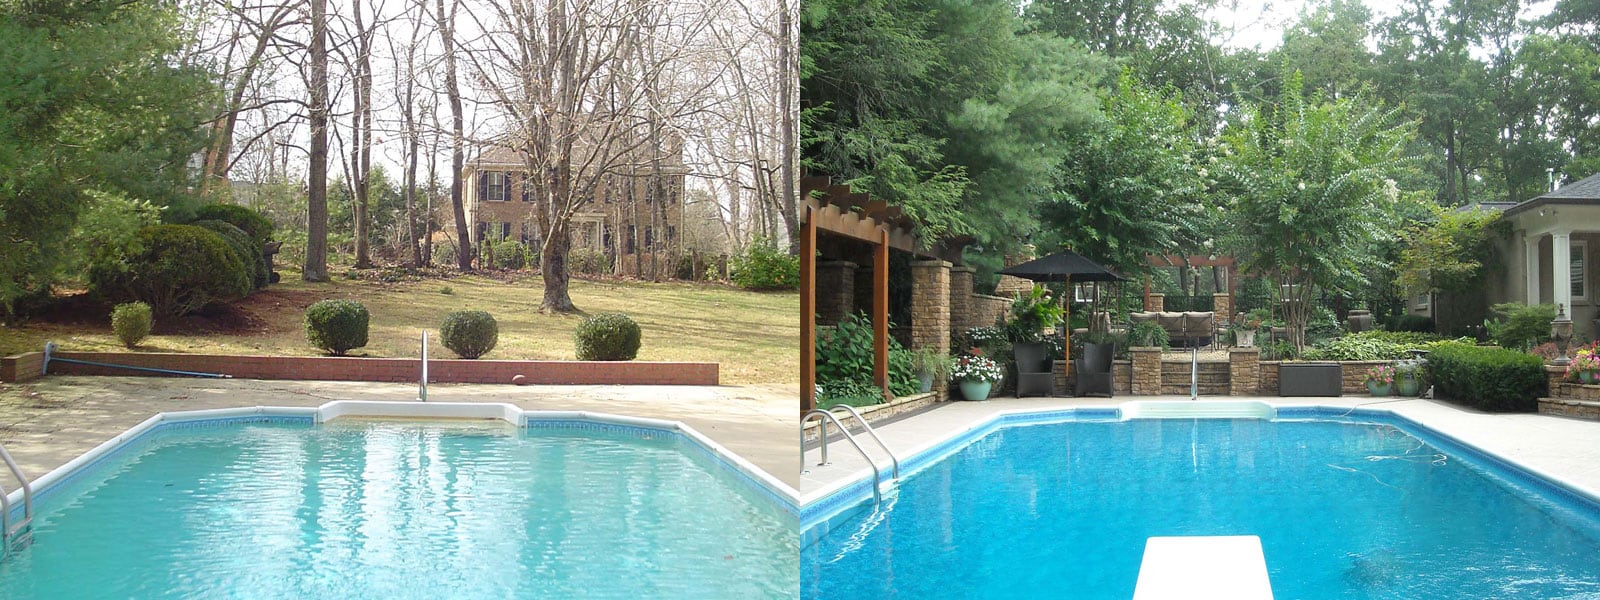 Backyard Swimming Pool Landscaping Before and After